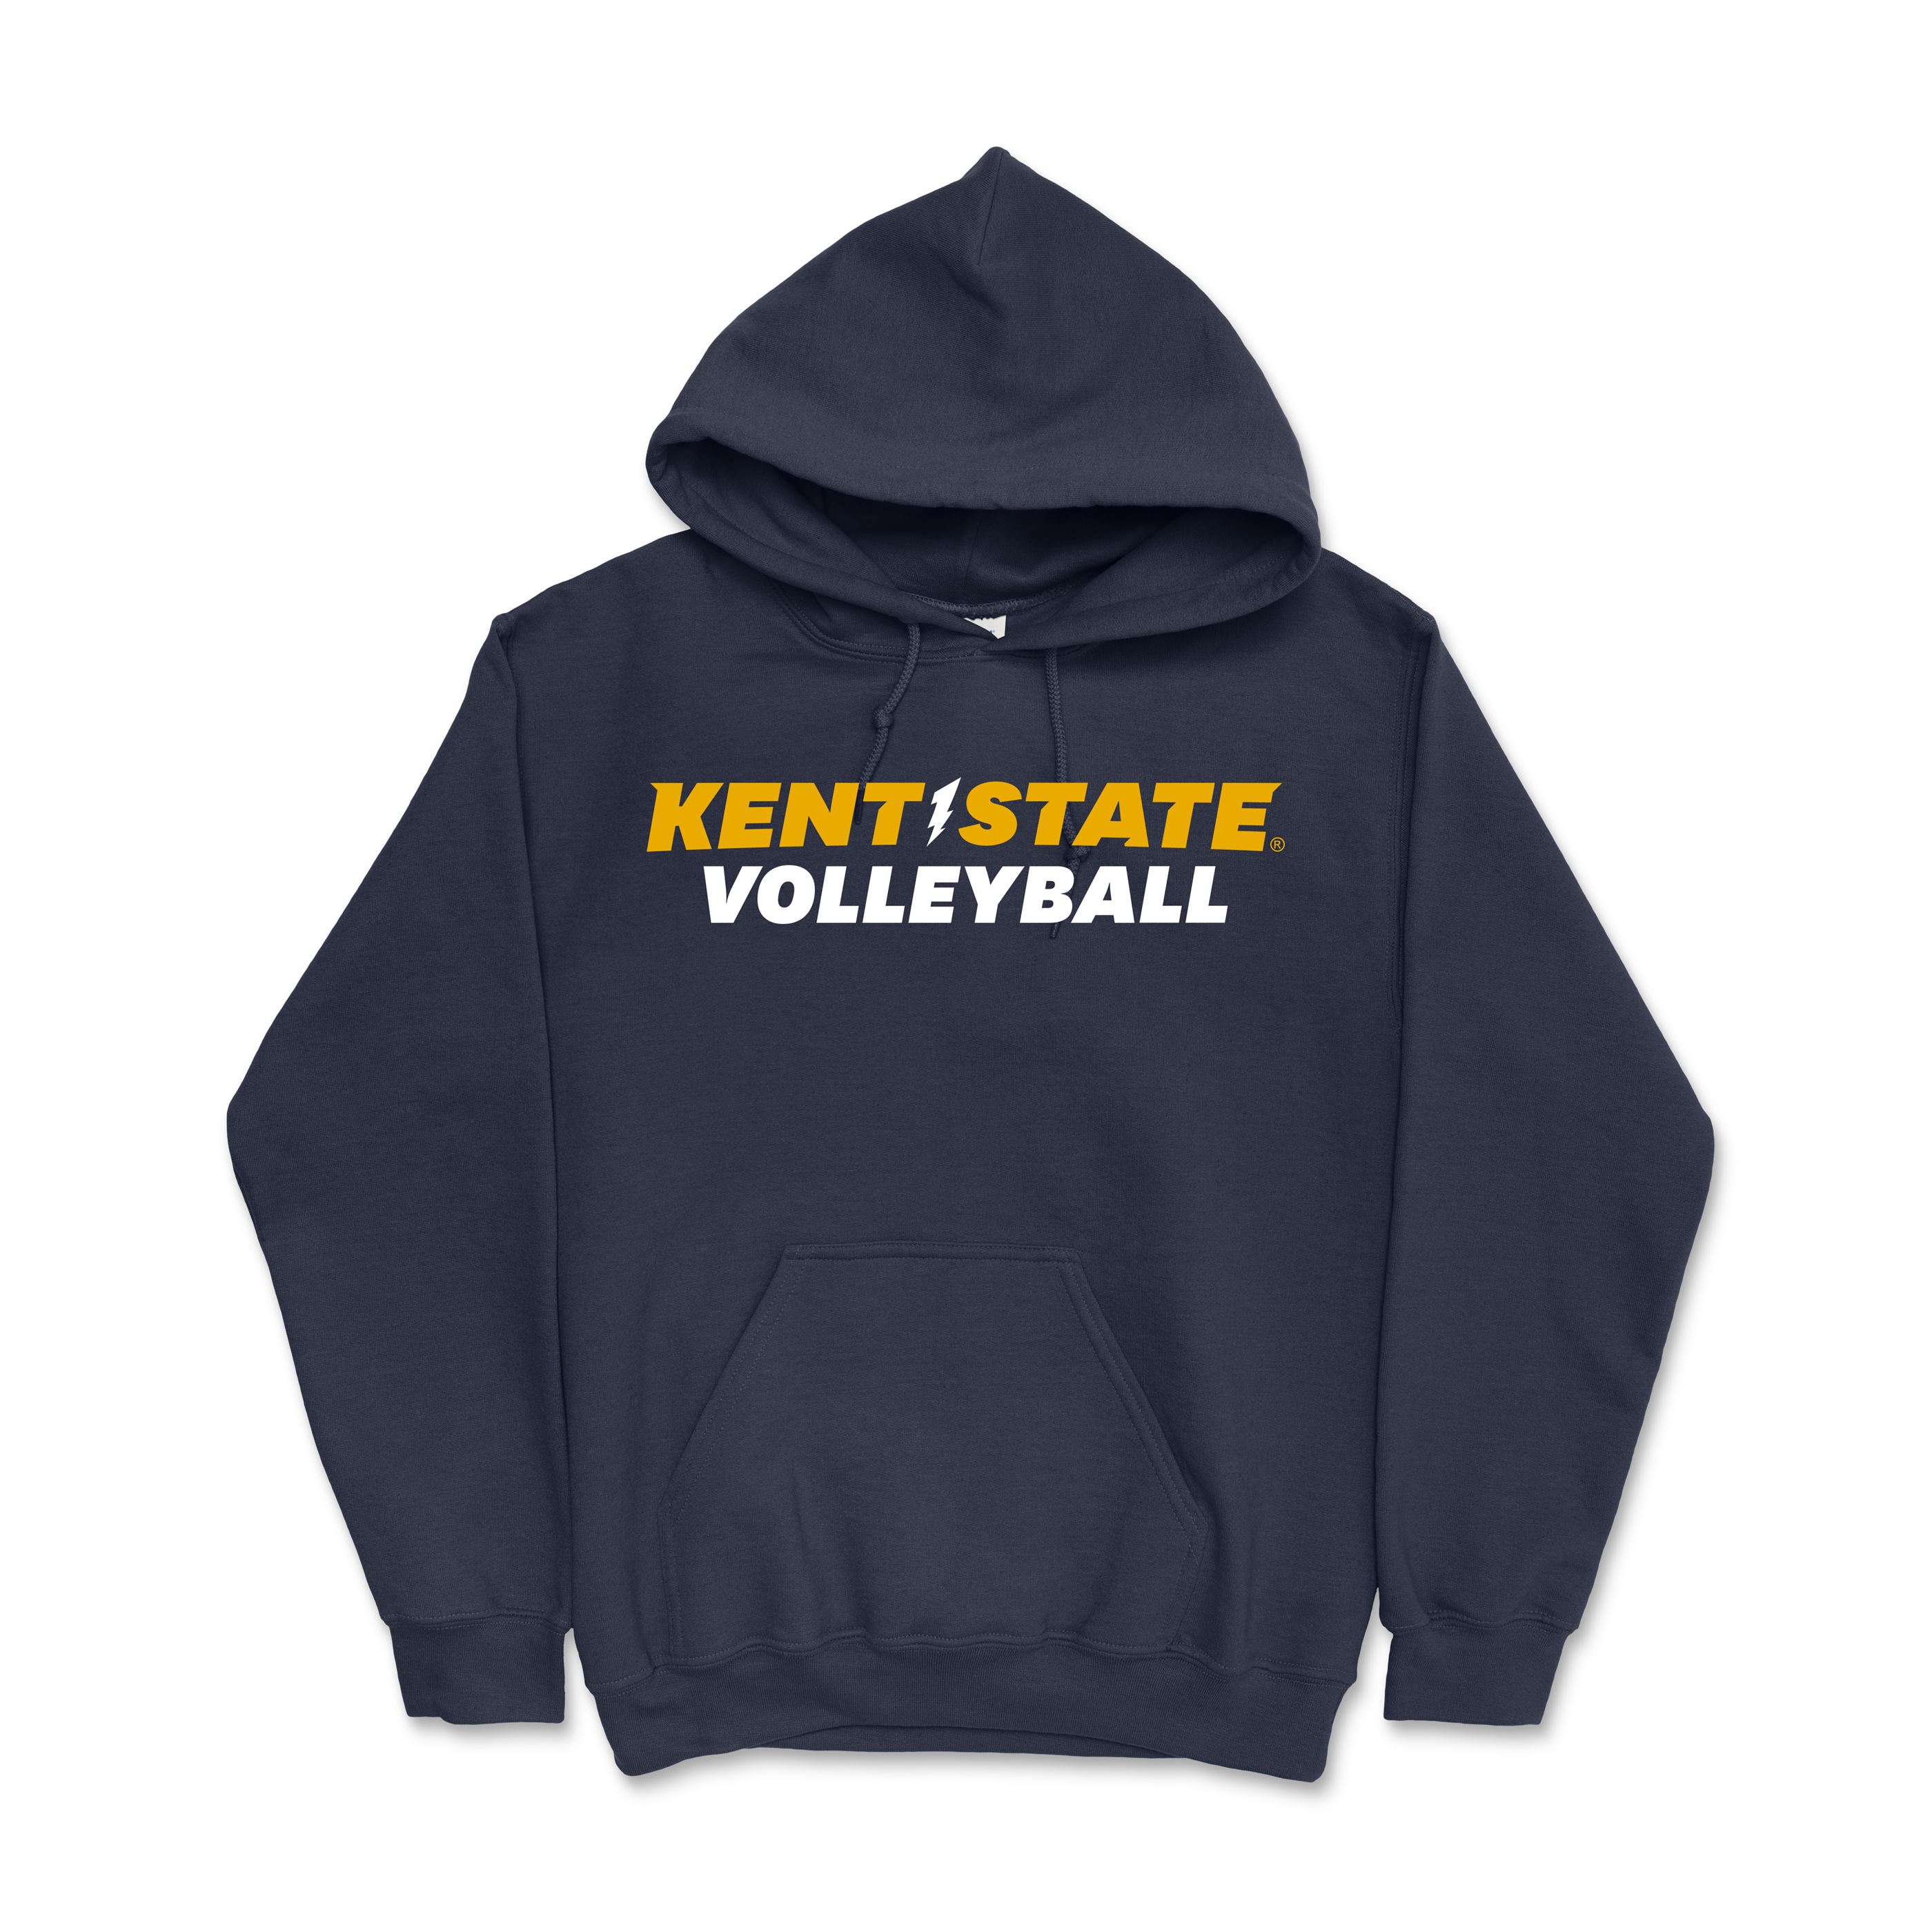 Kent State Volleyball Navy Hoodie